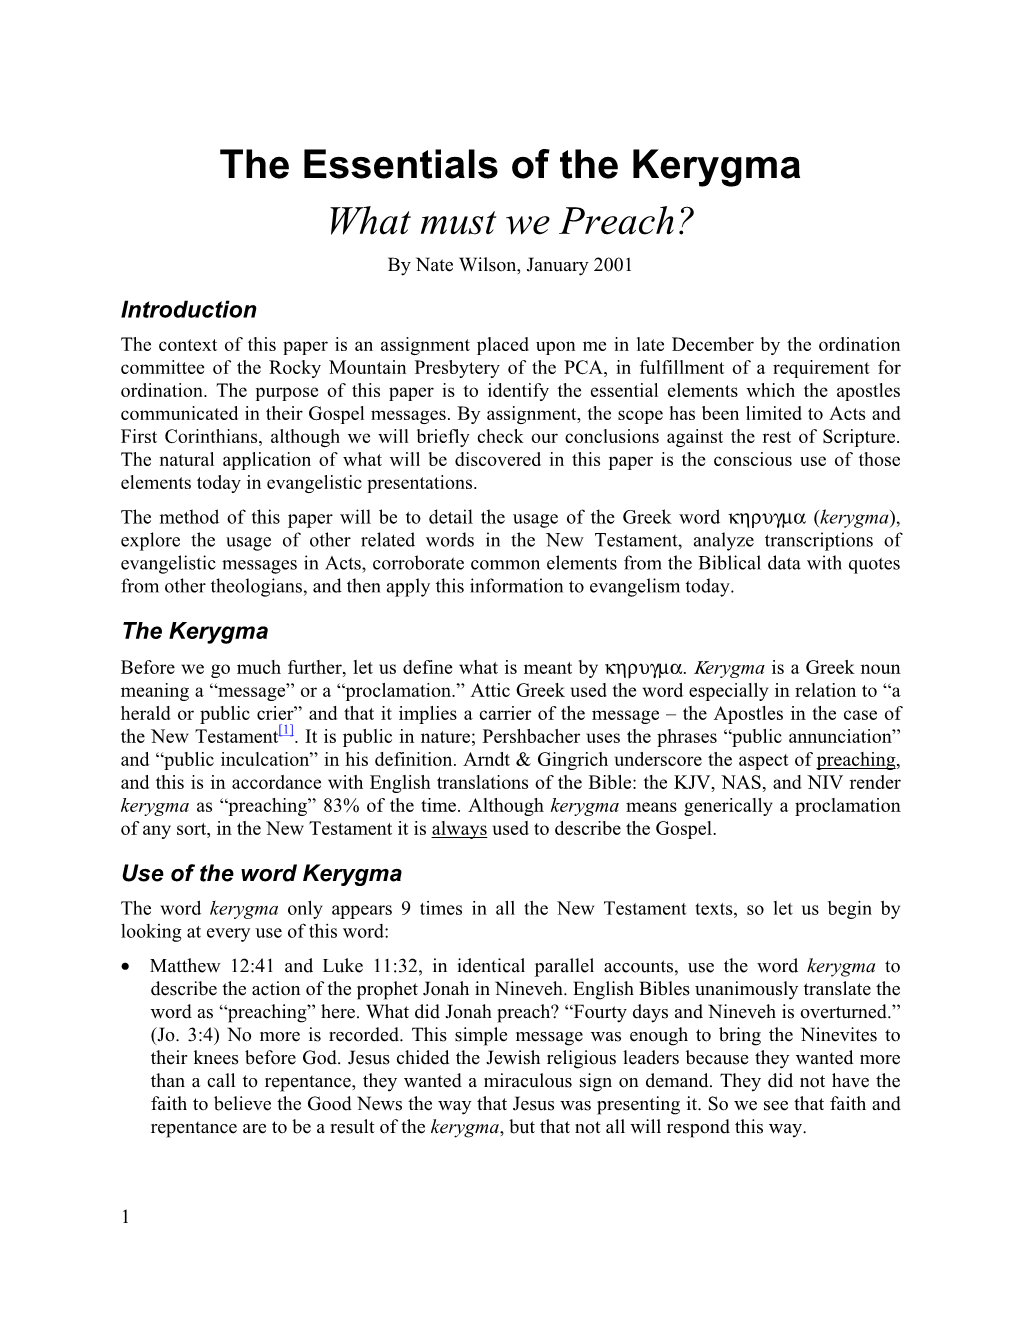 The Essentials of the Kerygma What Must We Preach? by Nate Wilson, January 2001